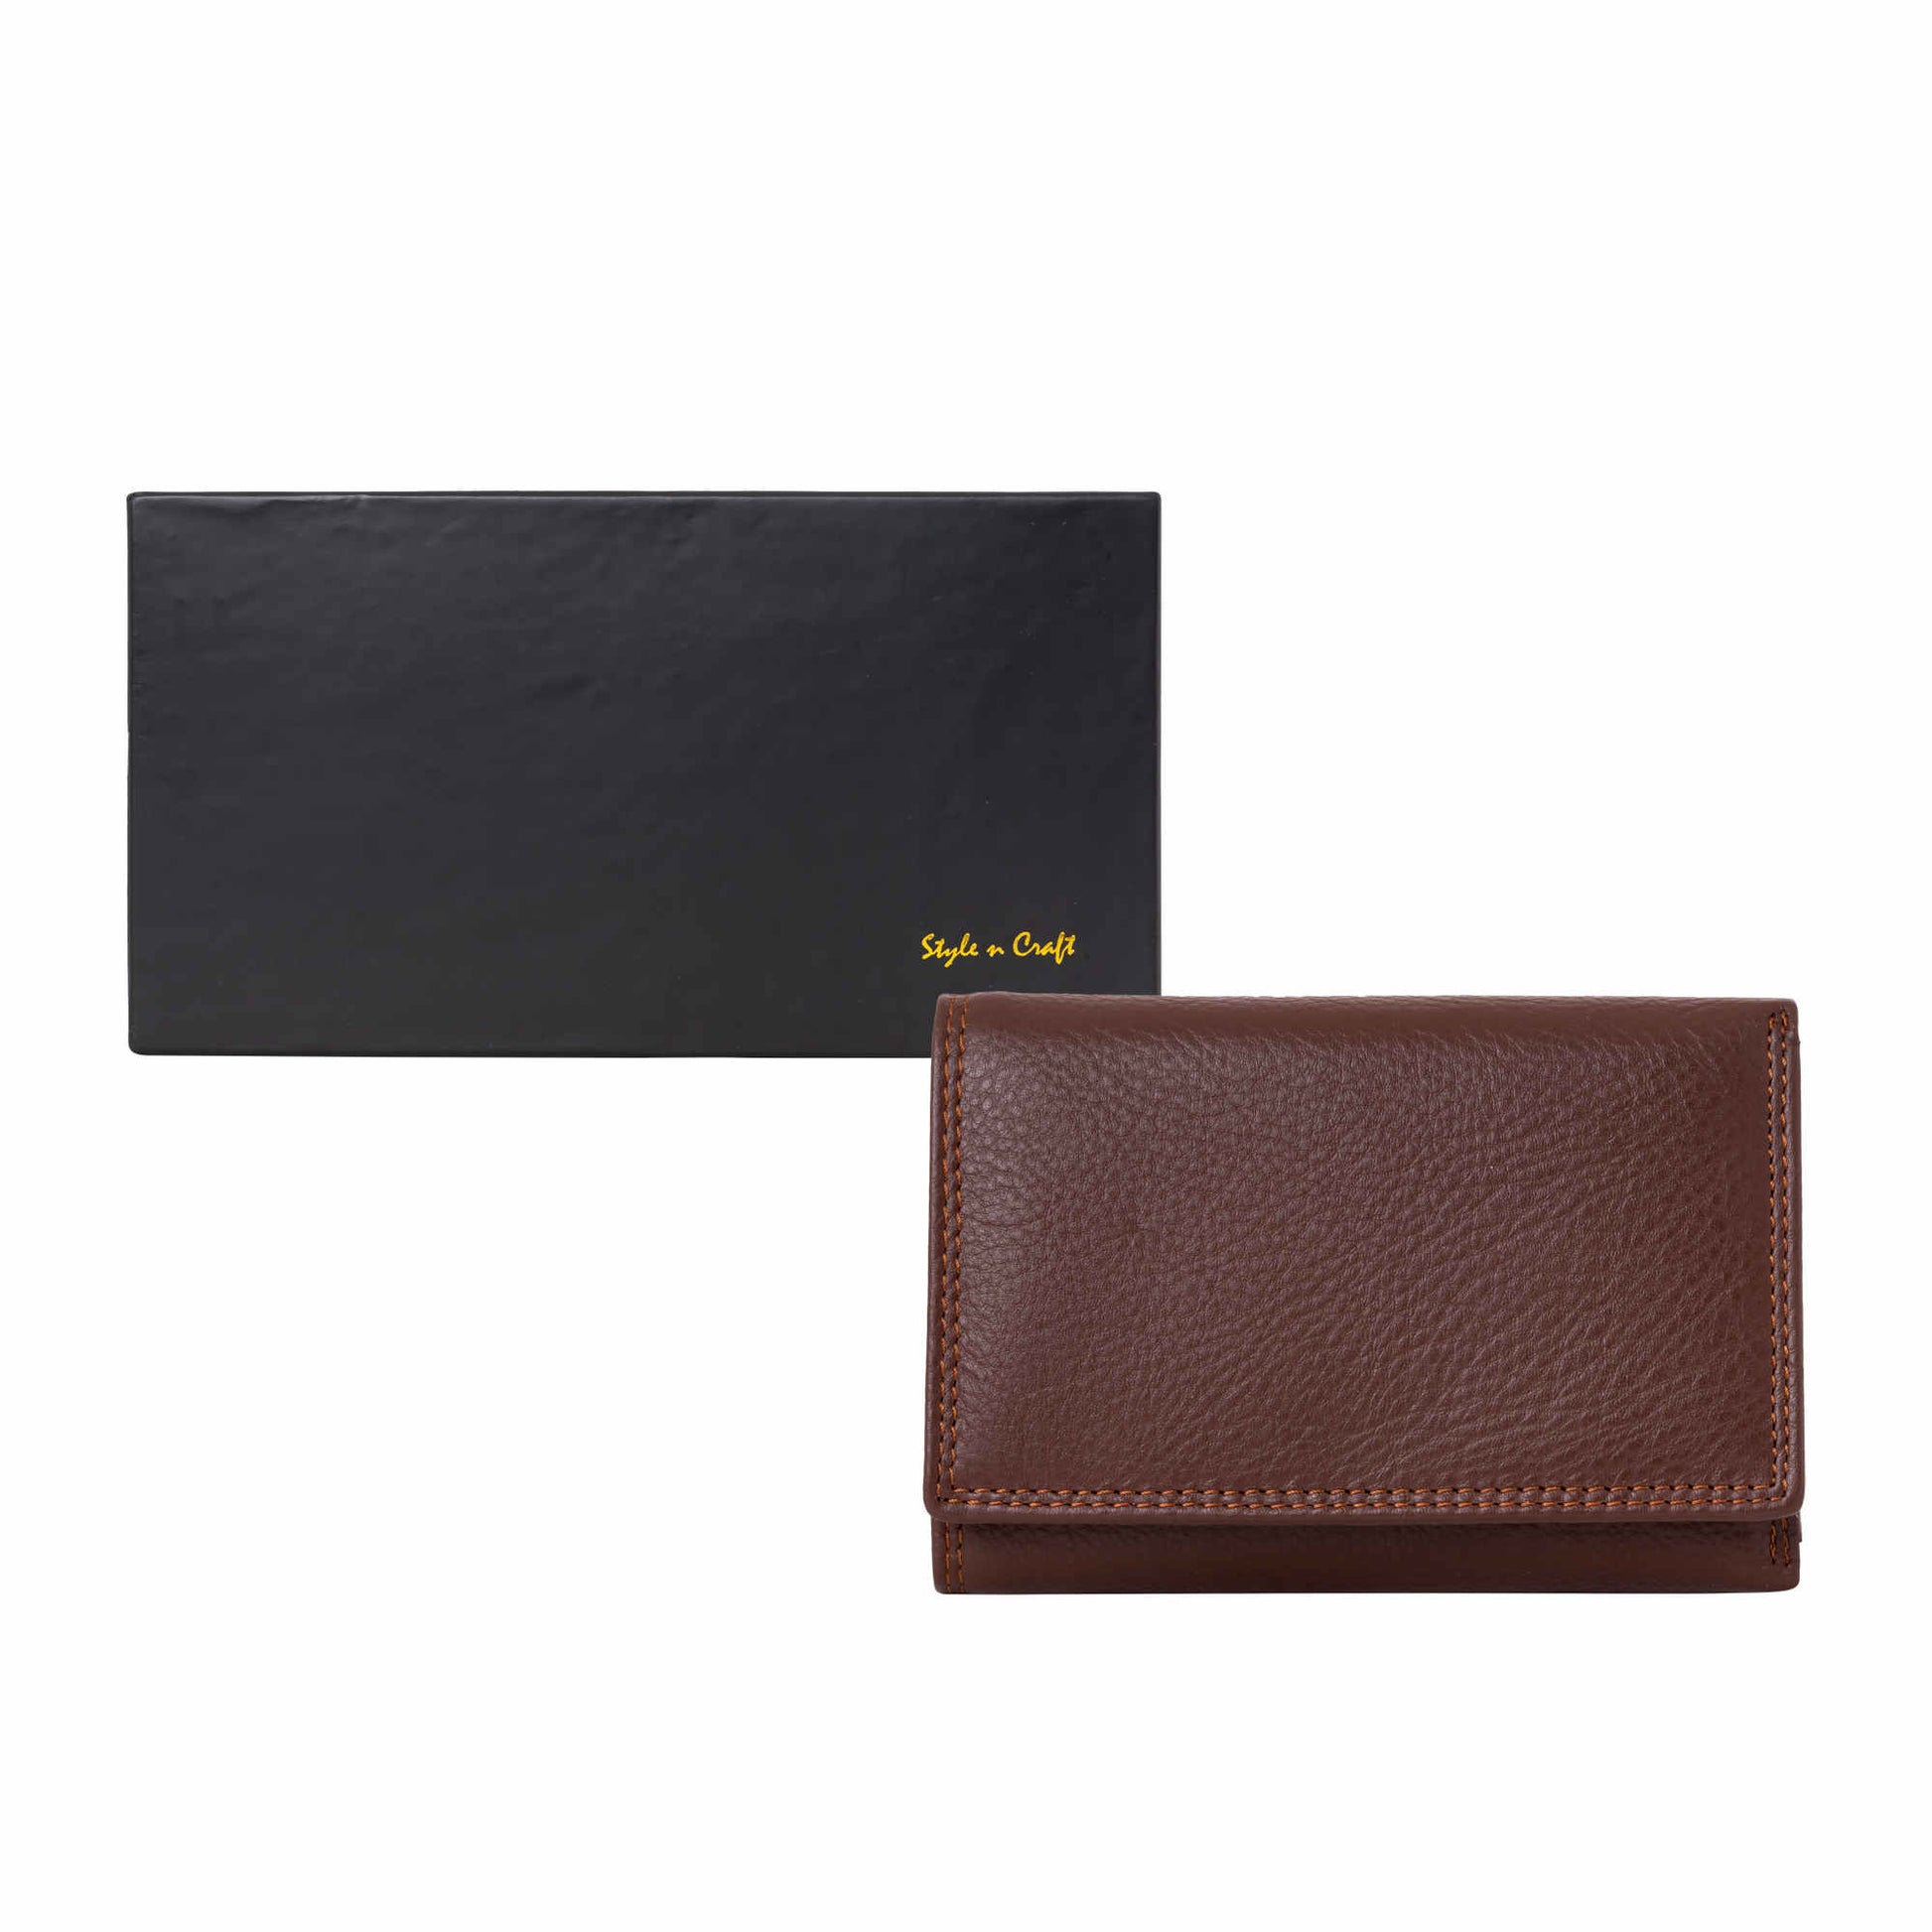 Style n Craft 391109 Ladies Trifold Brown Leather Wallet with Snap Button Closure - Closed Horizontal  View of the Trifold Wallet and the Box the Wallet Box